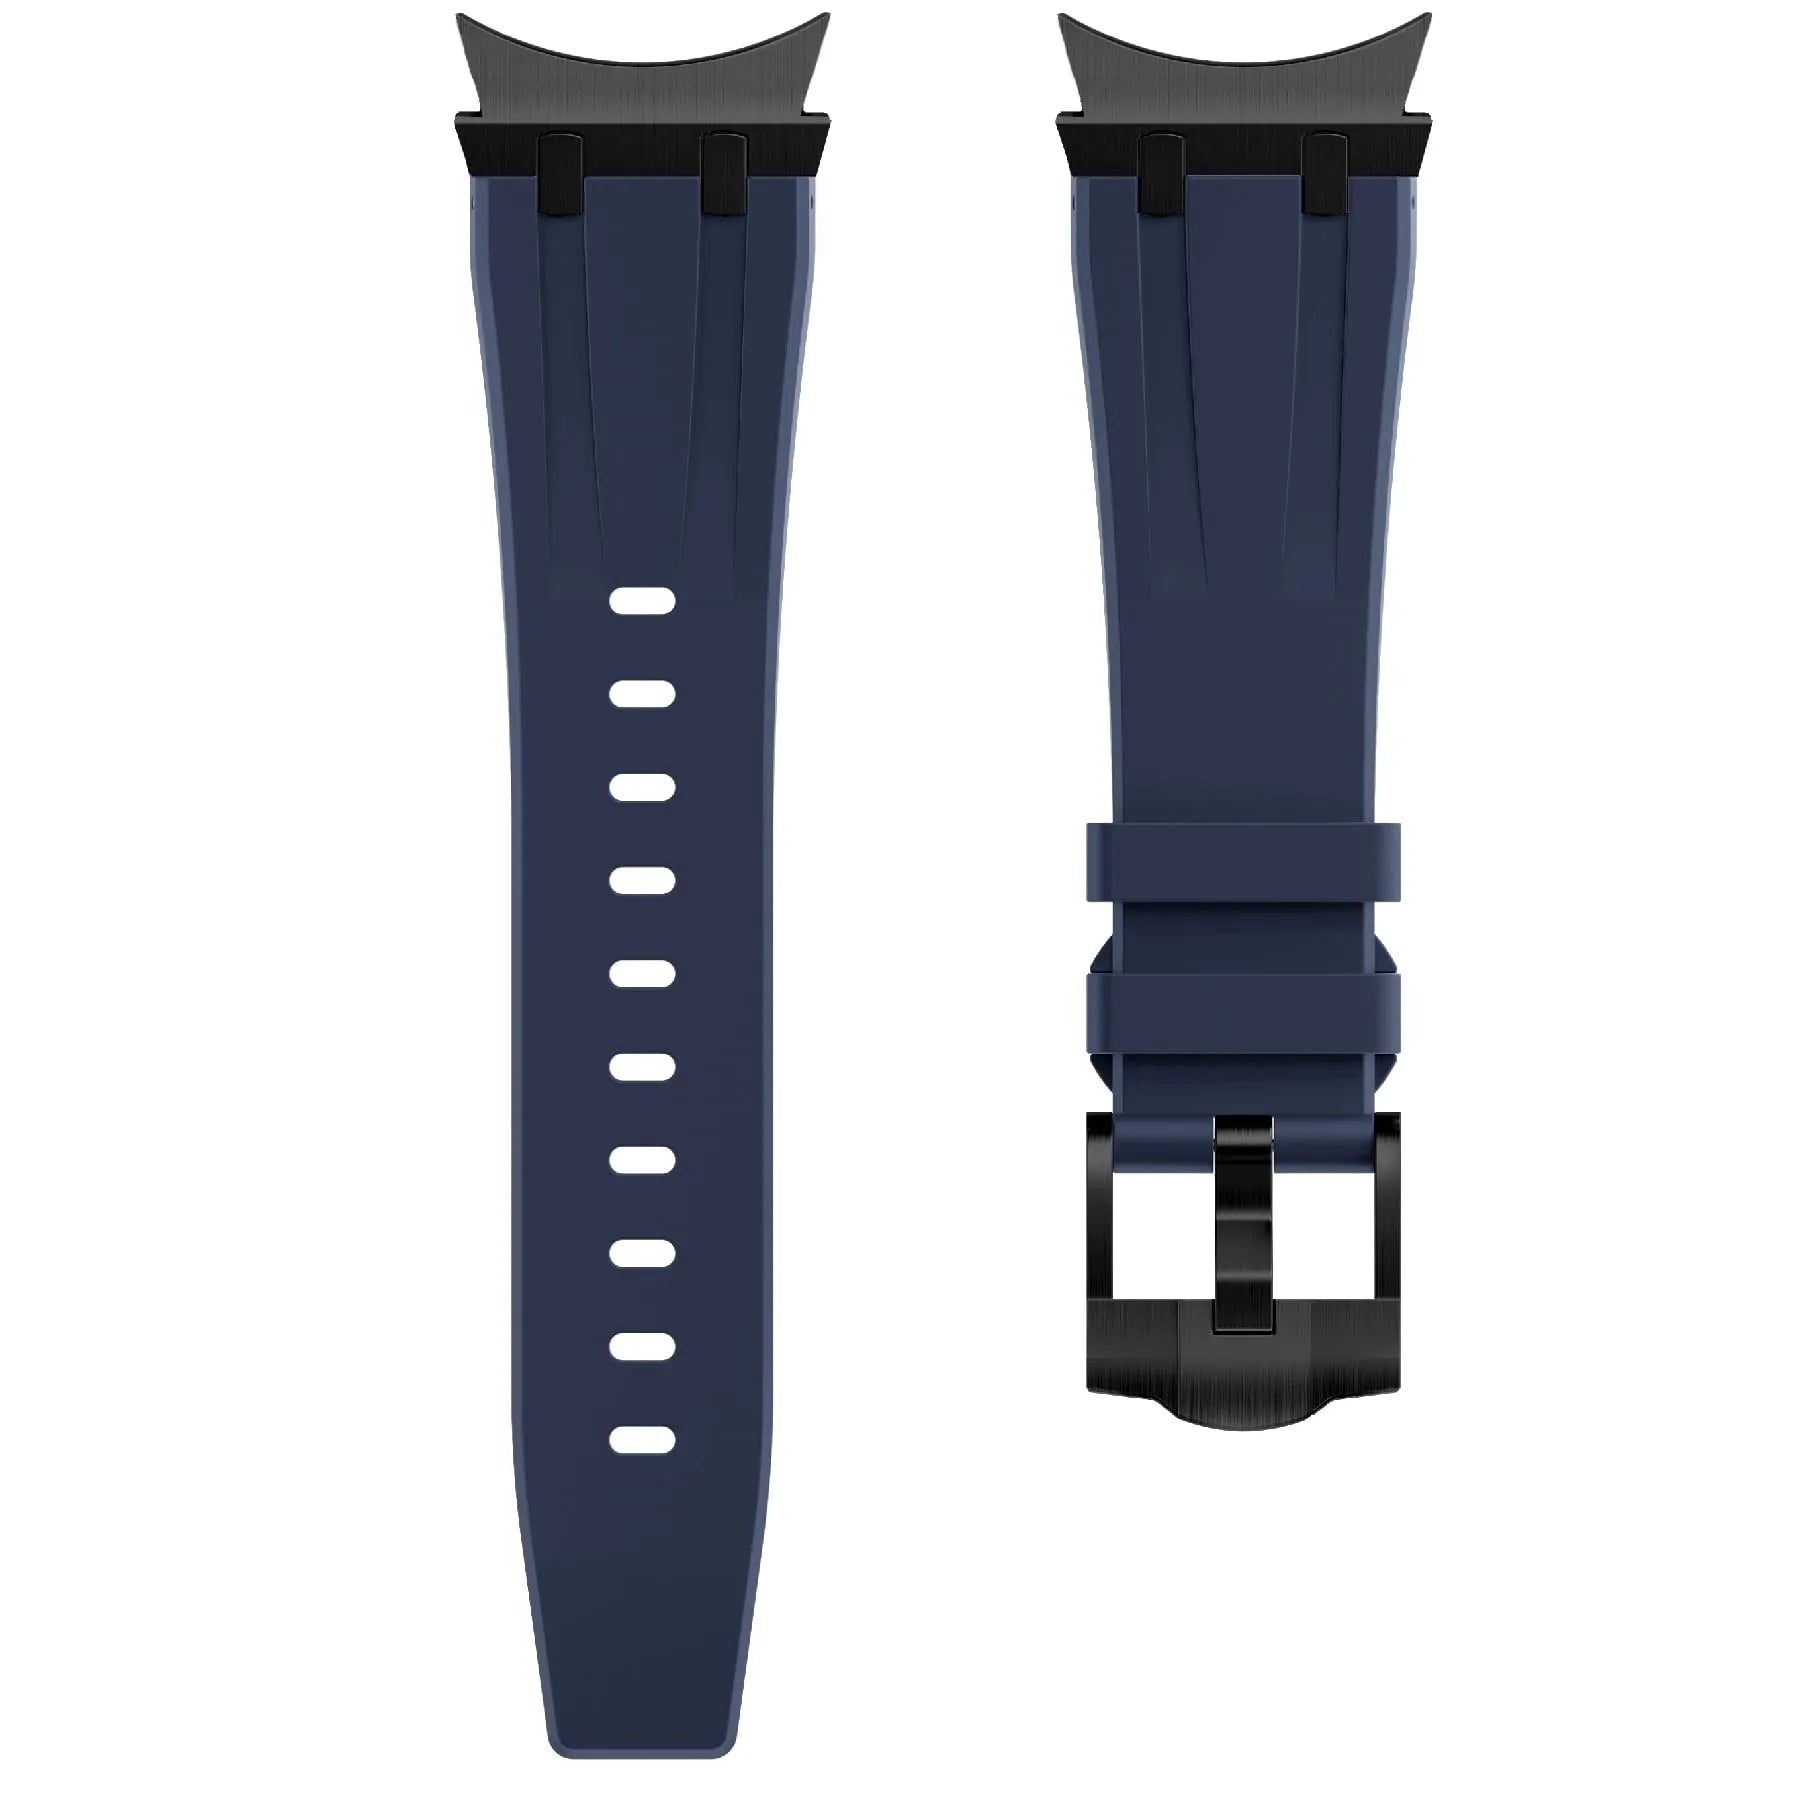 Galaxy Watch sport band#color_black navy blue